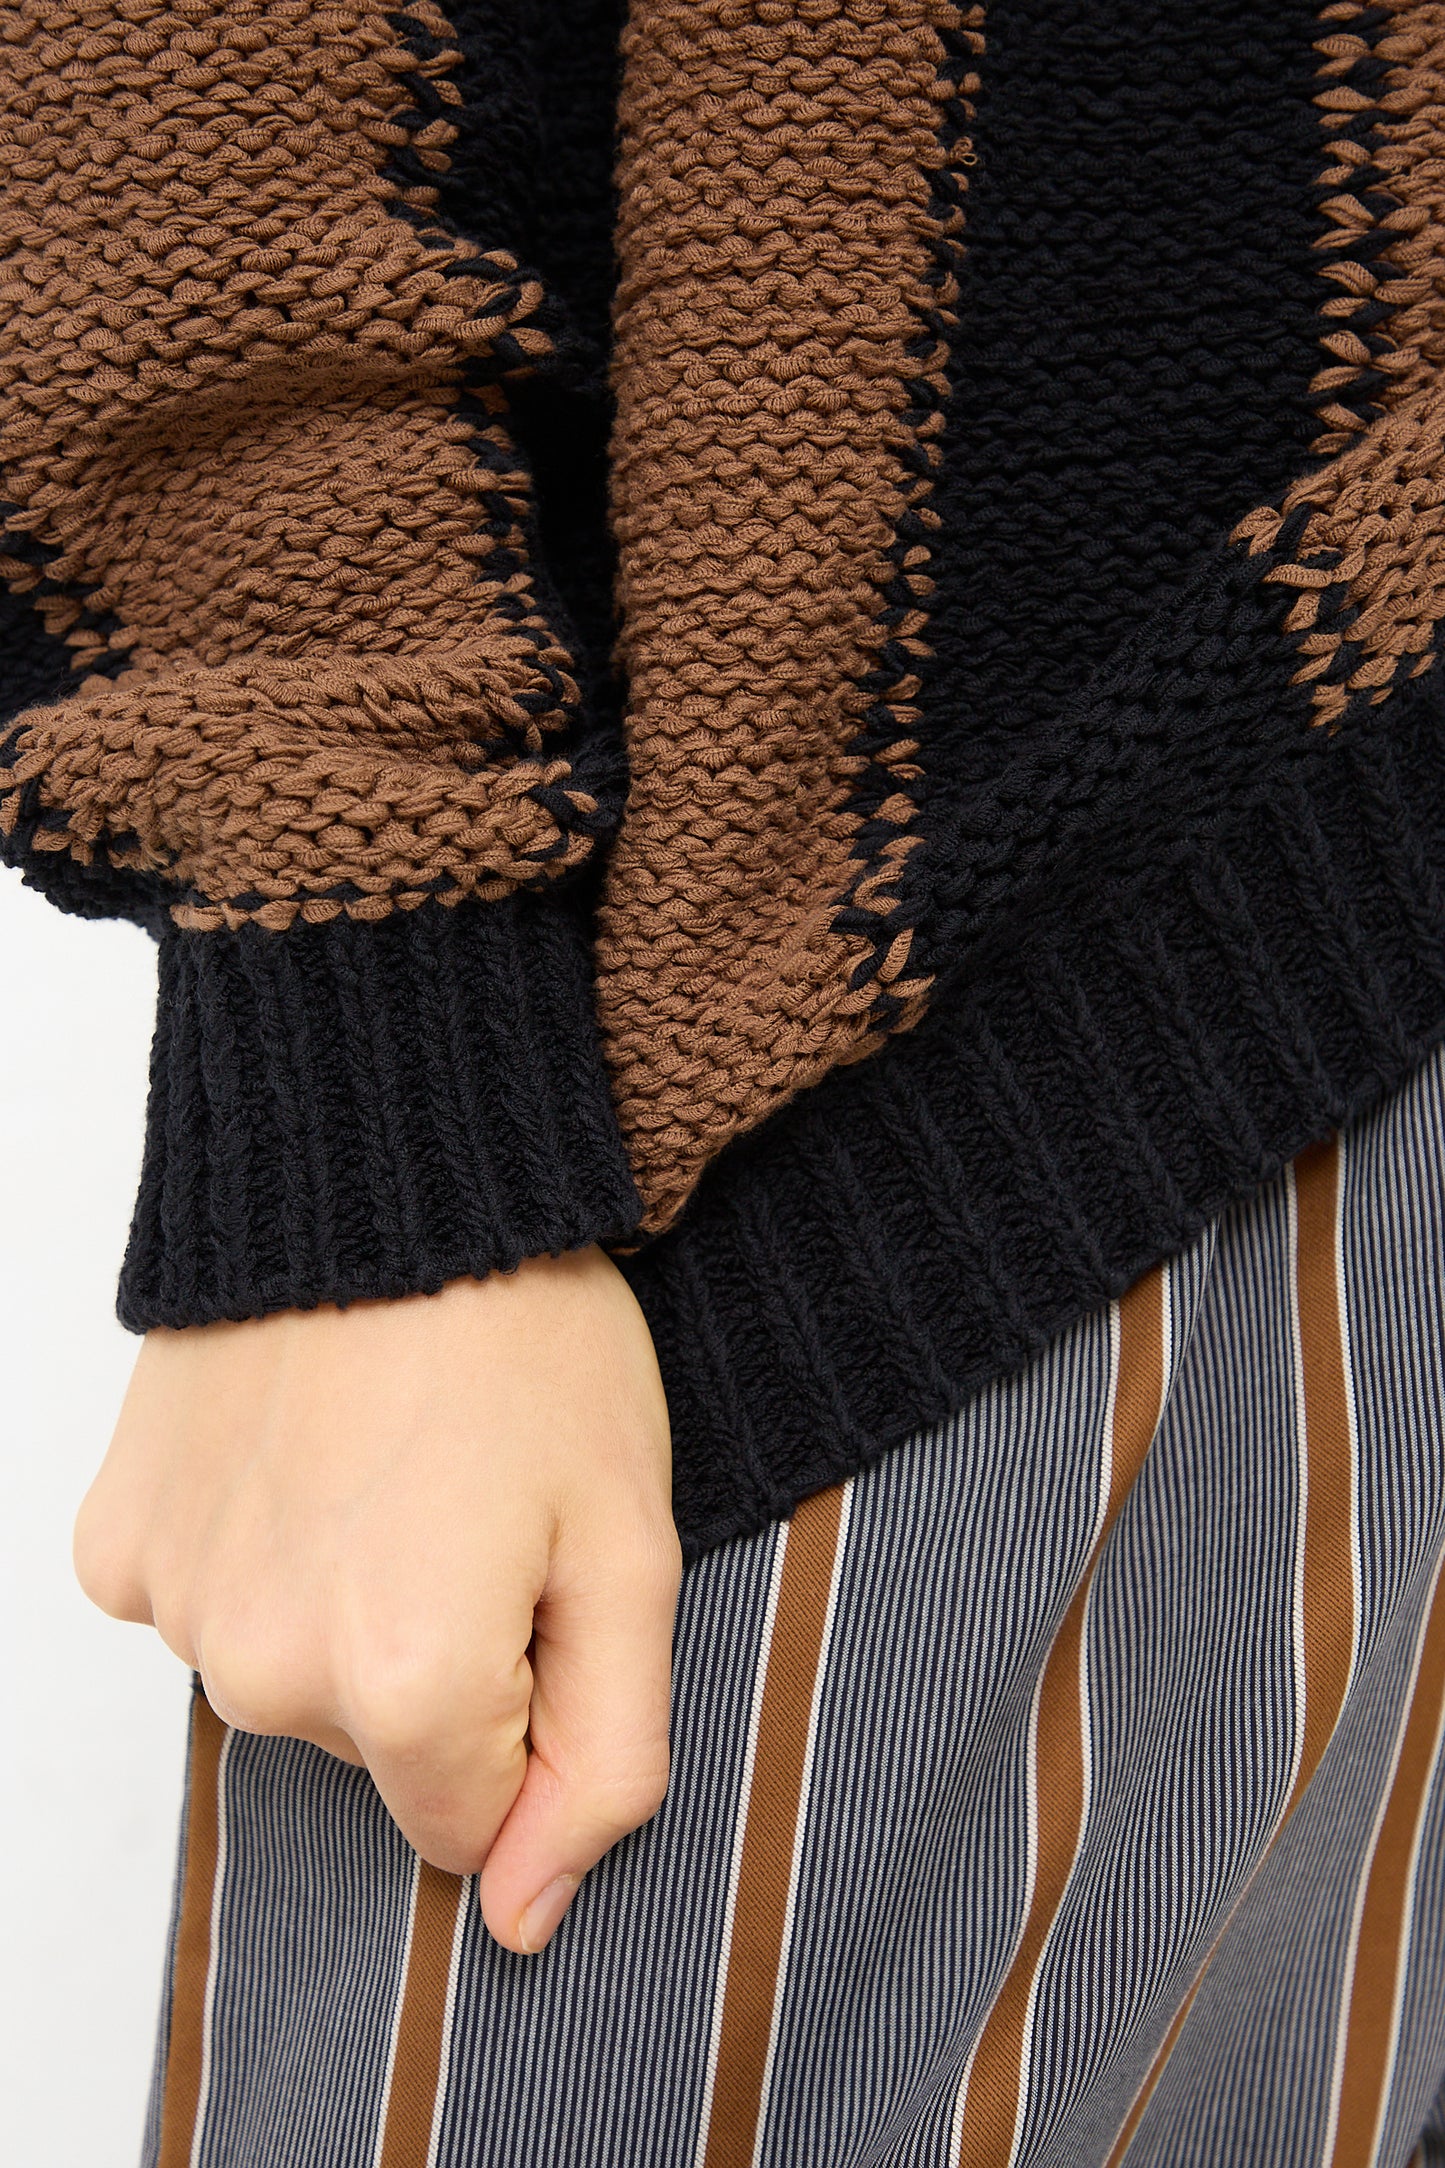 A woman wearing a Cristaseya Fettuccia Striped Sweater in Black and Noisette and striped pants. Up close view.